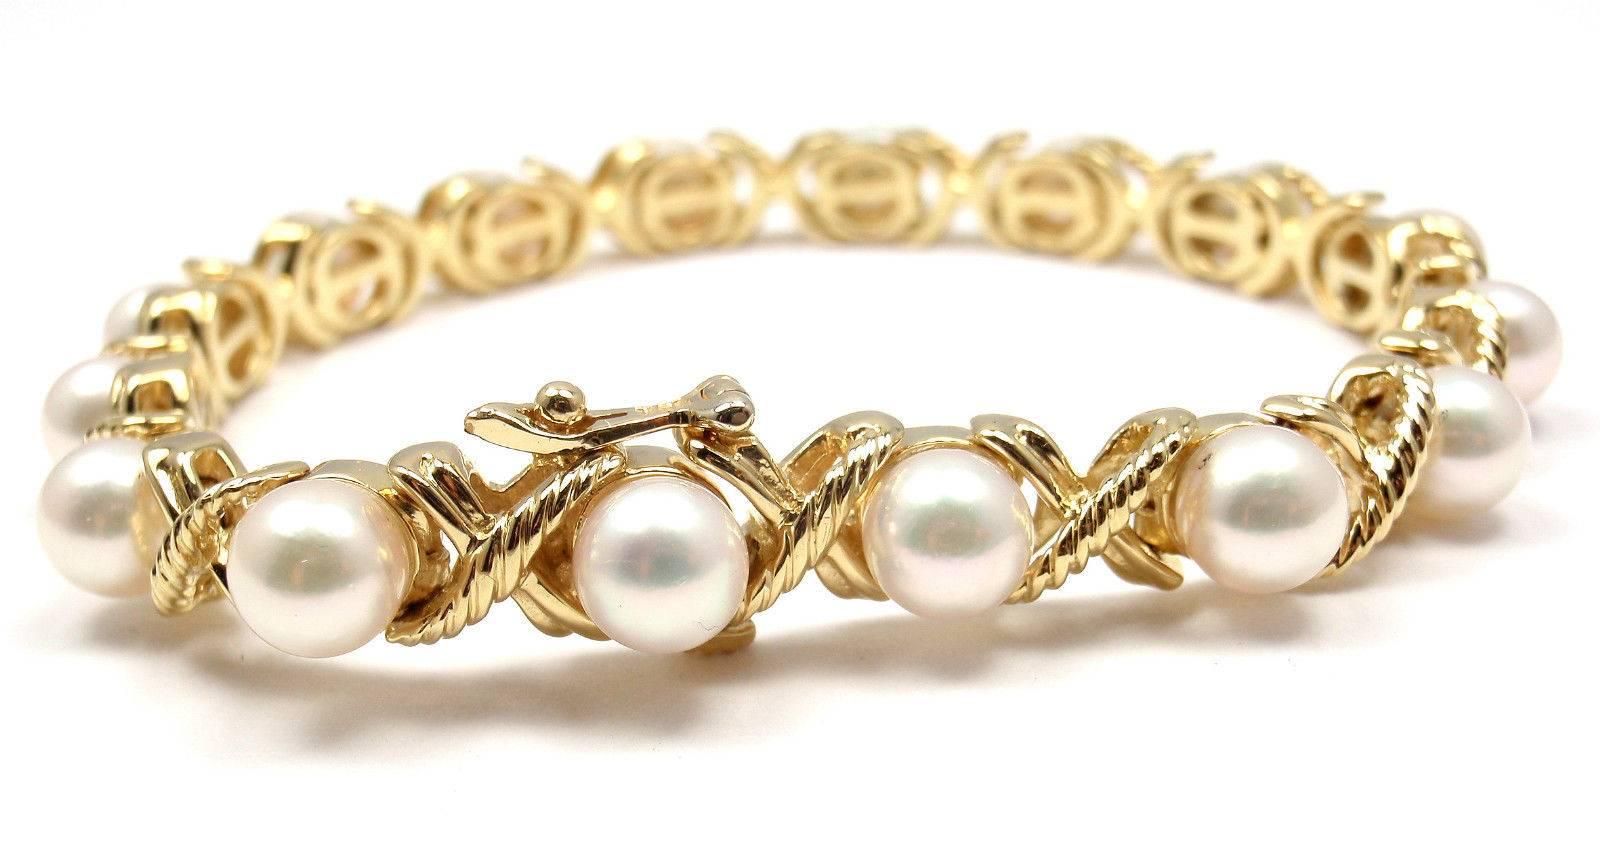 18k Yellow Gold Pearl X Bracelet by Tiffany & Co. 
With 16 round akoya pearls approx. 7mm each

Details: 
Length: 7